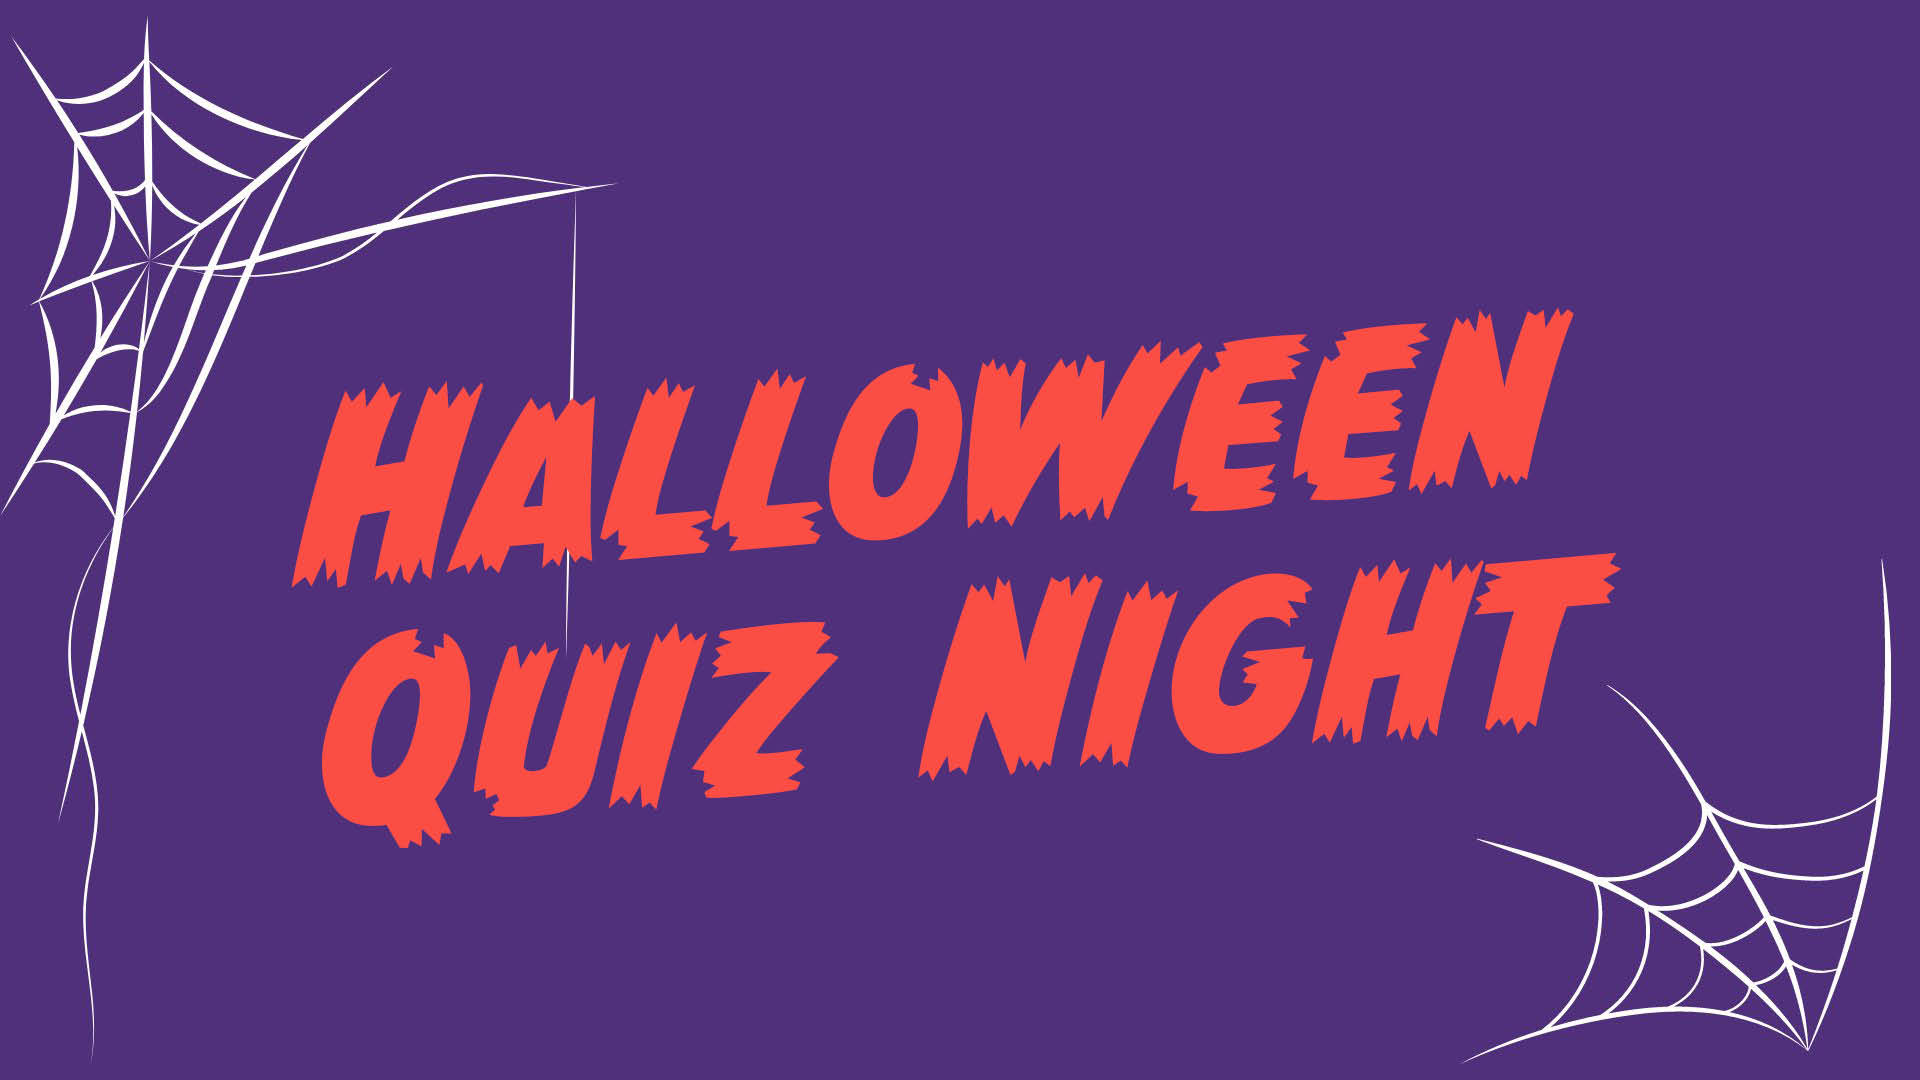 A dark blue background with white cobweb illustrations in the corners and orange horror-style text that says 'Halloween Quiz Night'